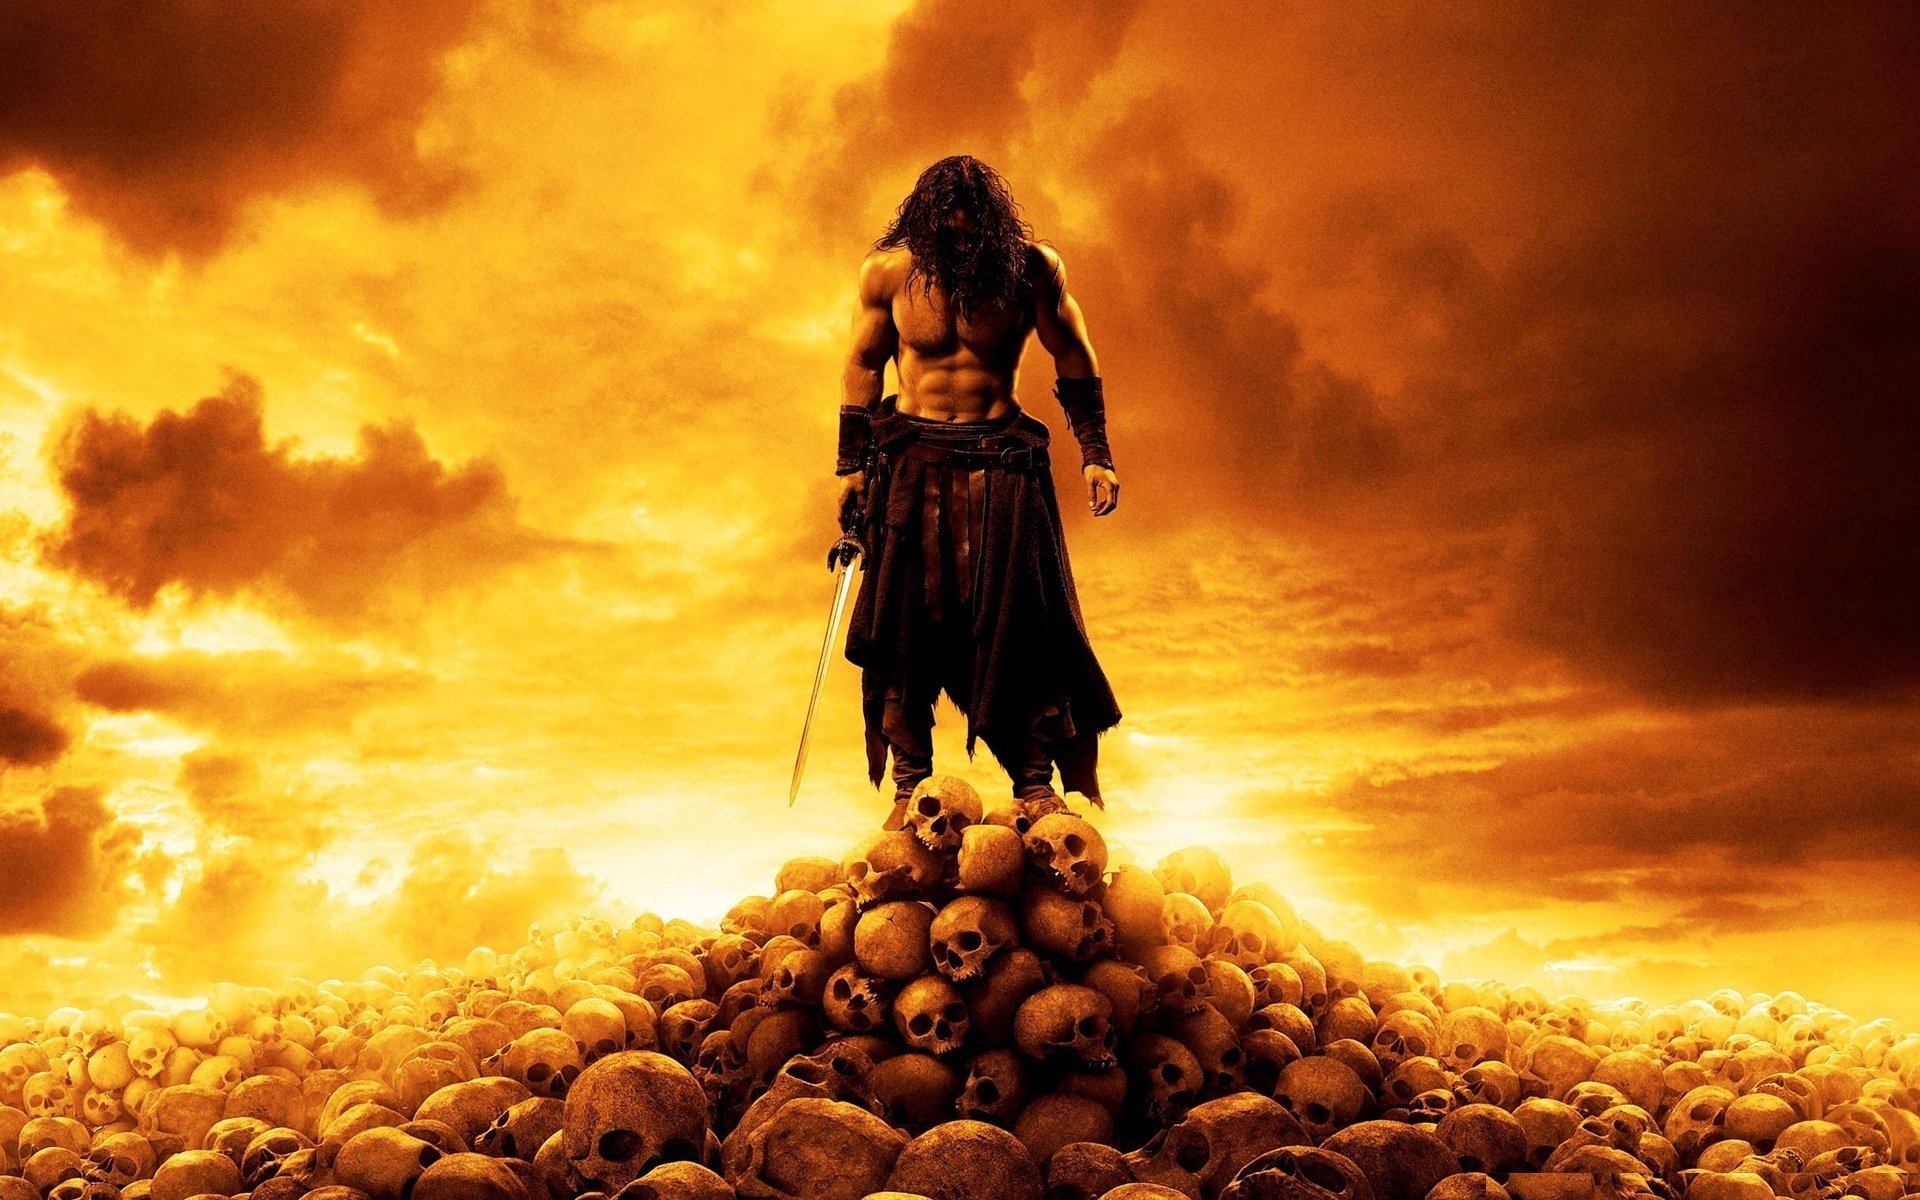 23 Conan The Barbarian 2011 HD Wallpapers Backgrounds